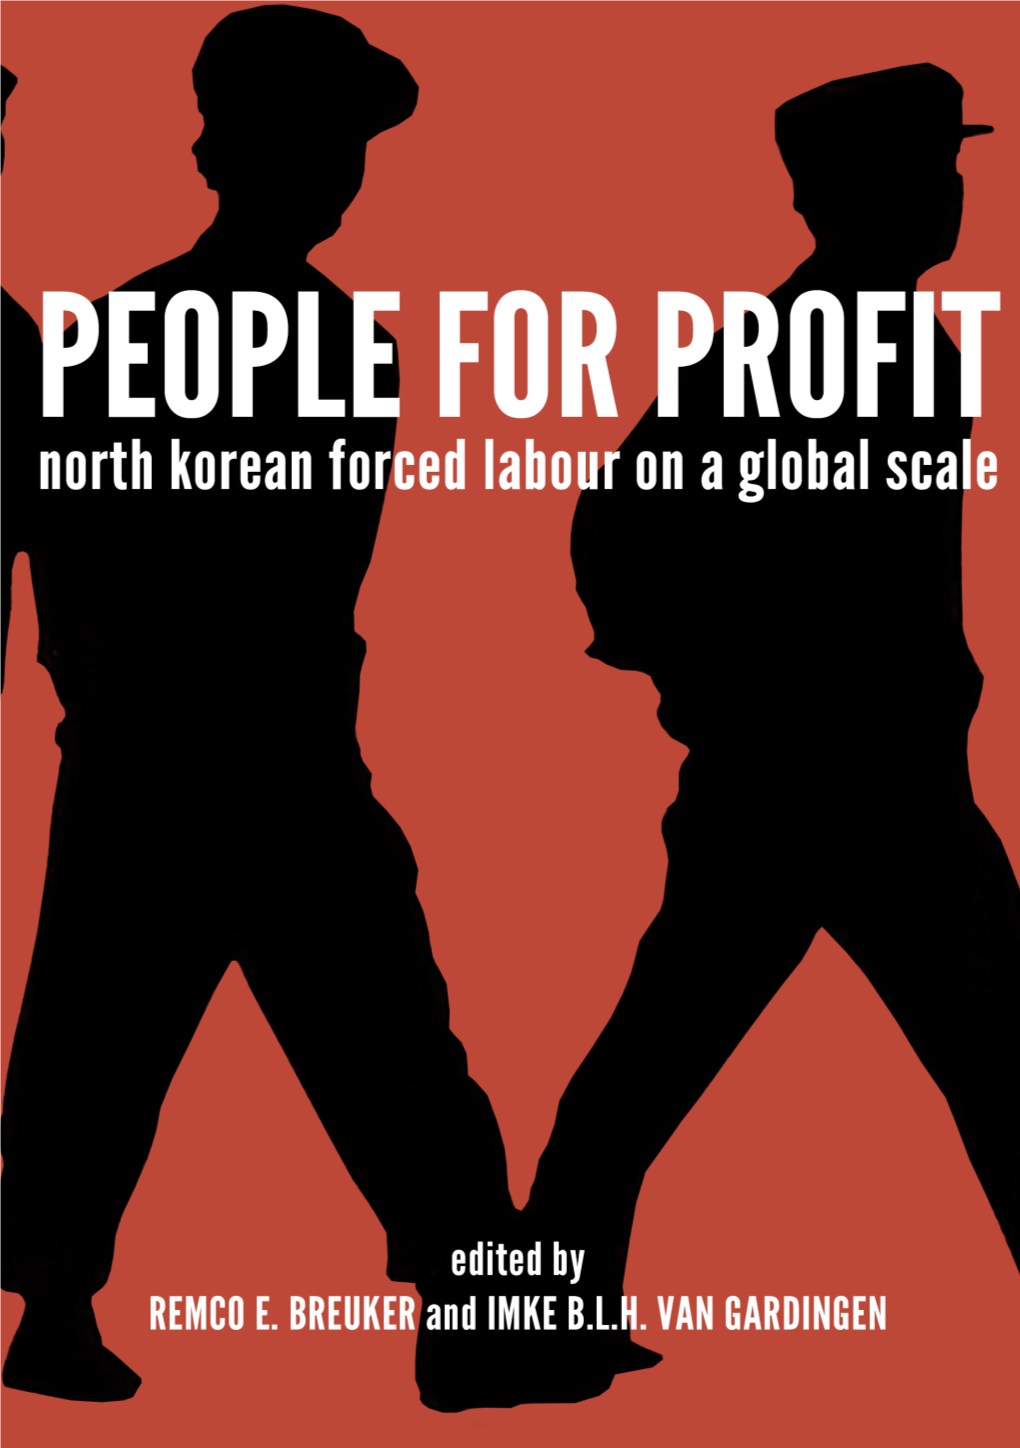 People for Profit: North Korean Forced Labour on a Global Scale Edited by Remco E